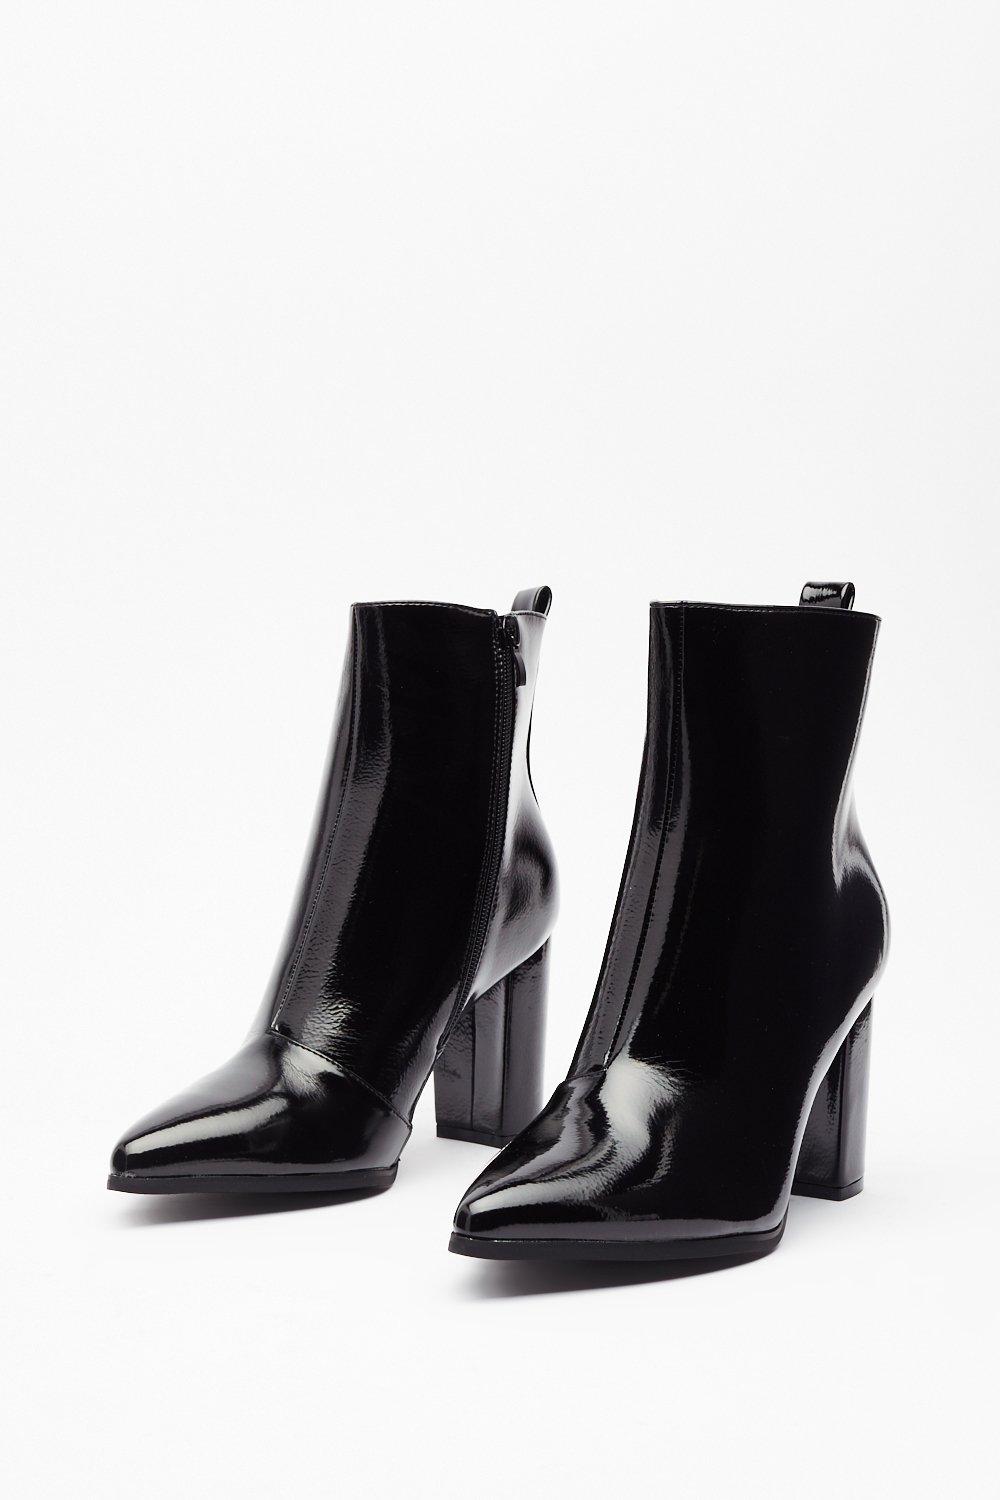 shiny black ankle booties